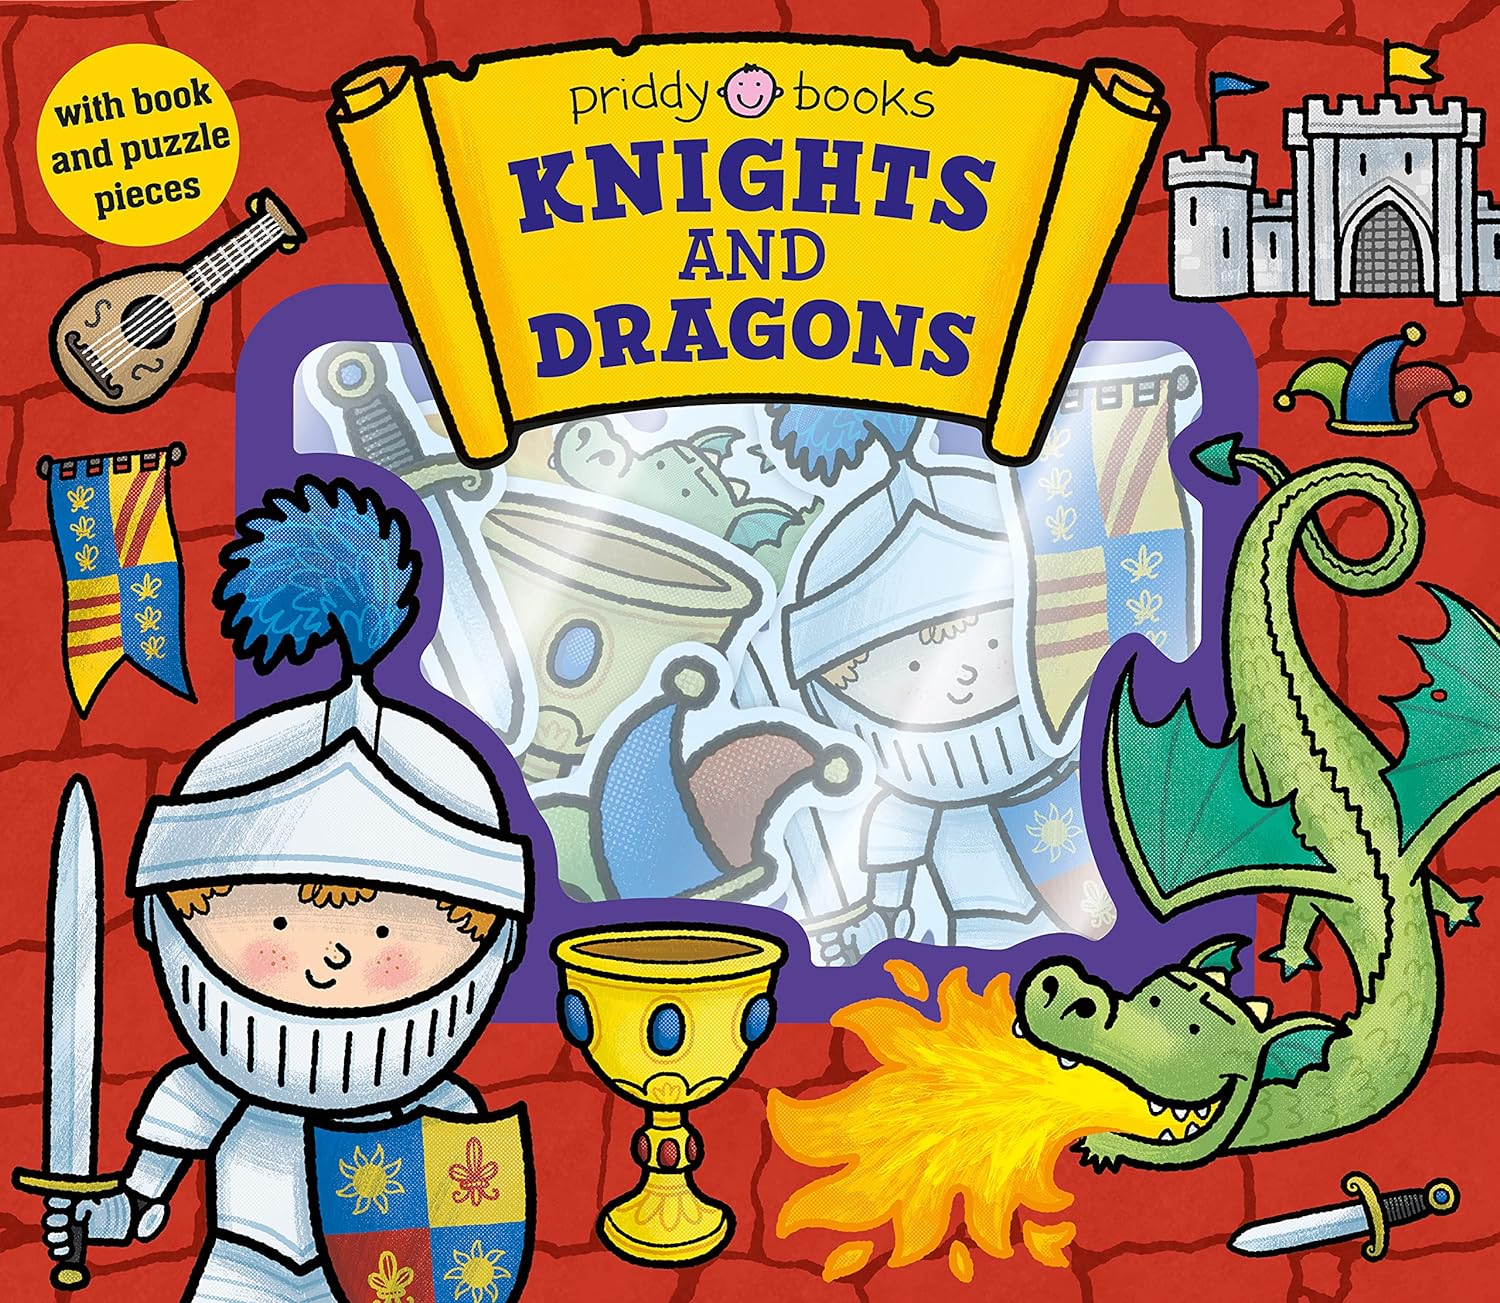 Let’s Pretend Sets: Knights And Dragons